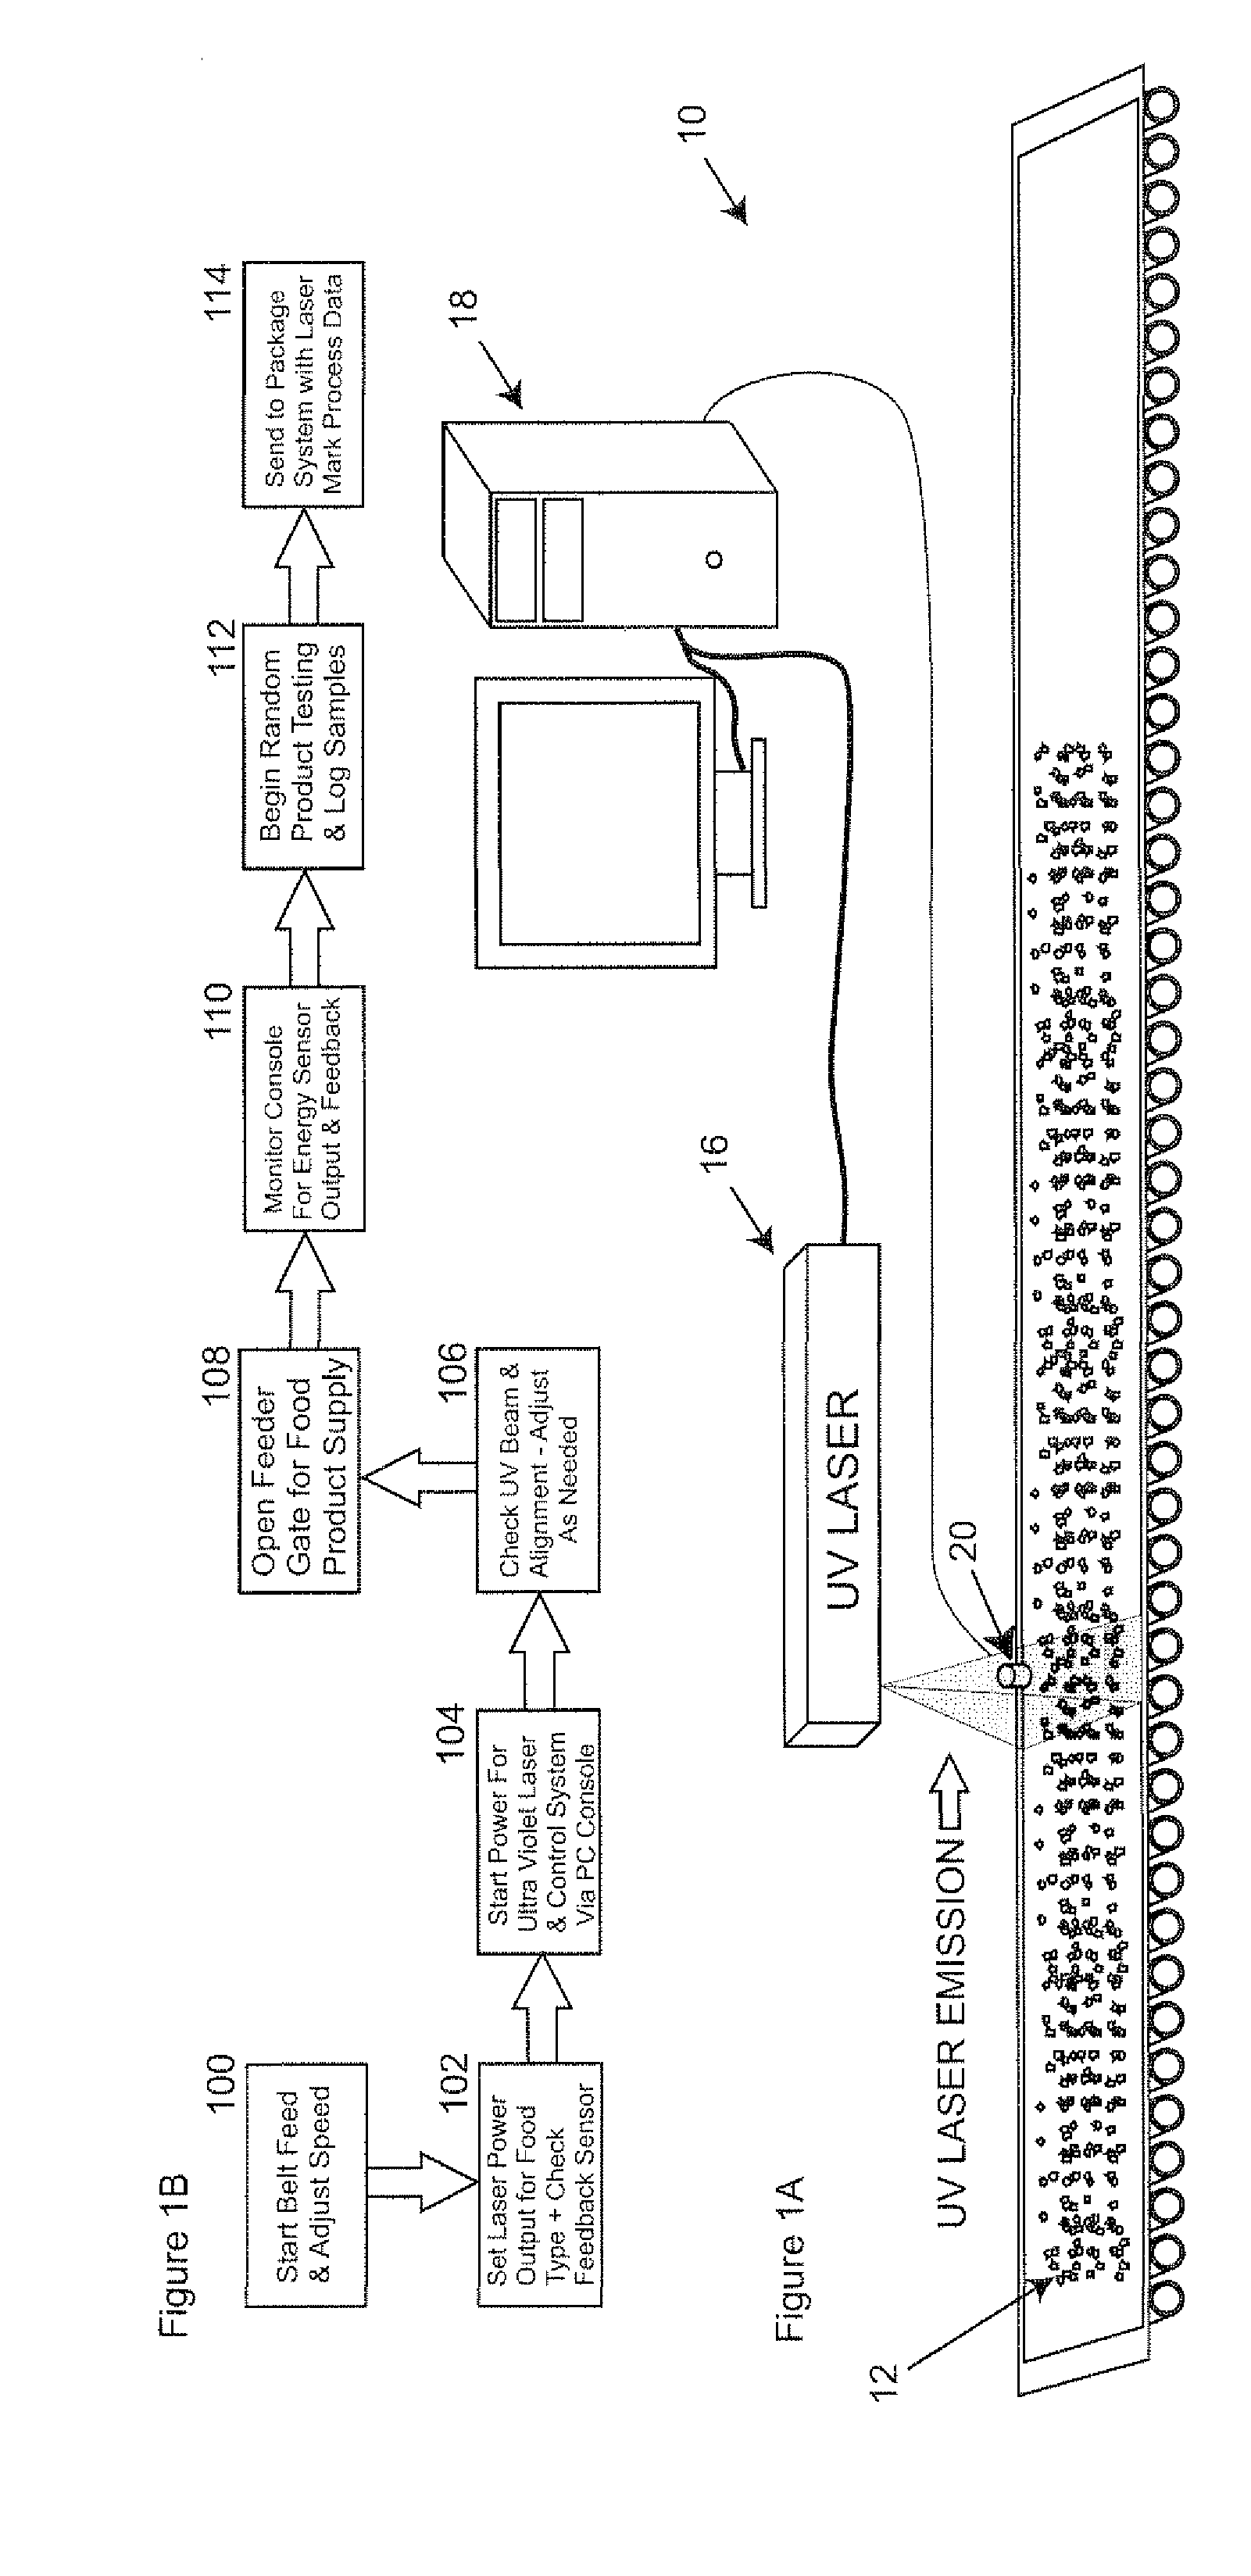 Method and apparatus for sanitizing consumable products using ultraviolet light